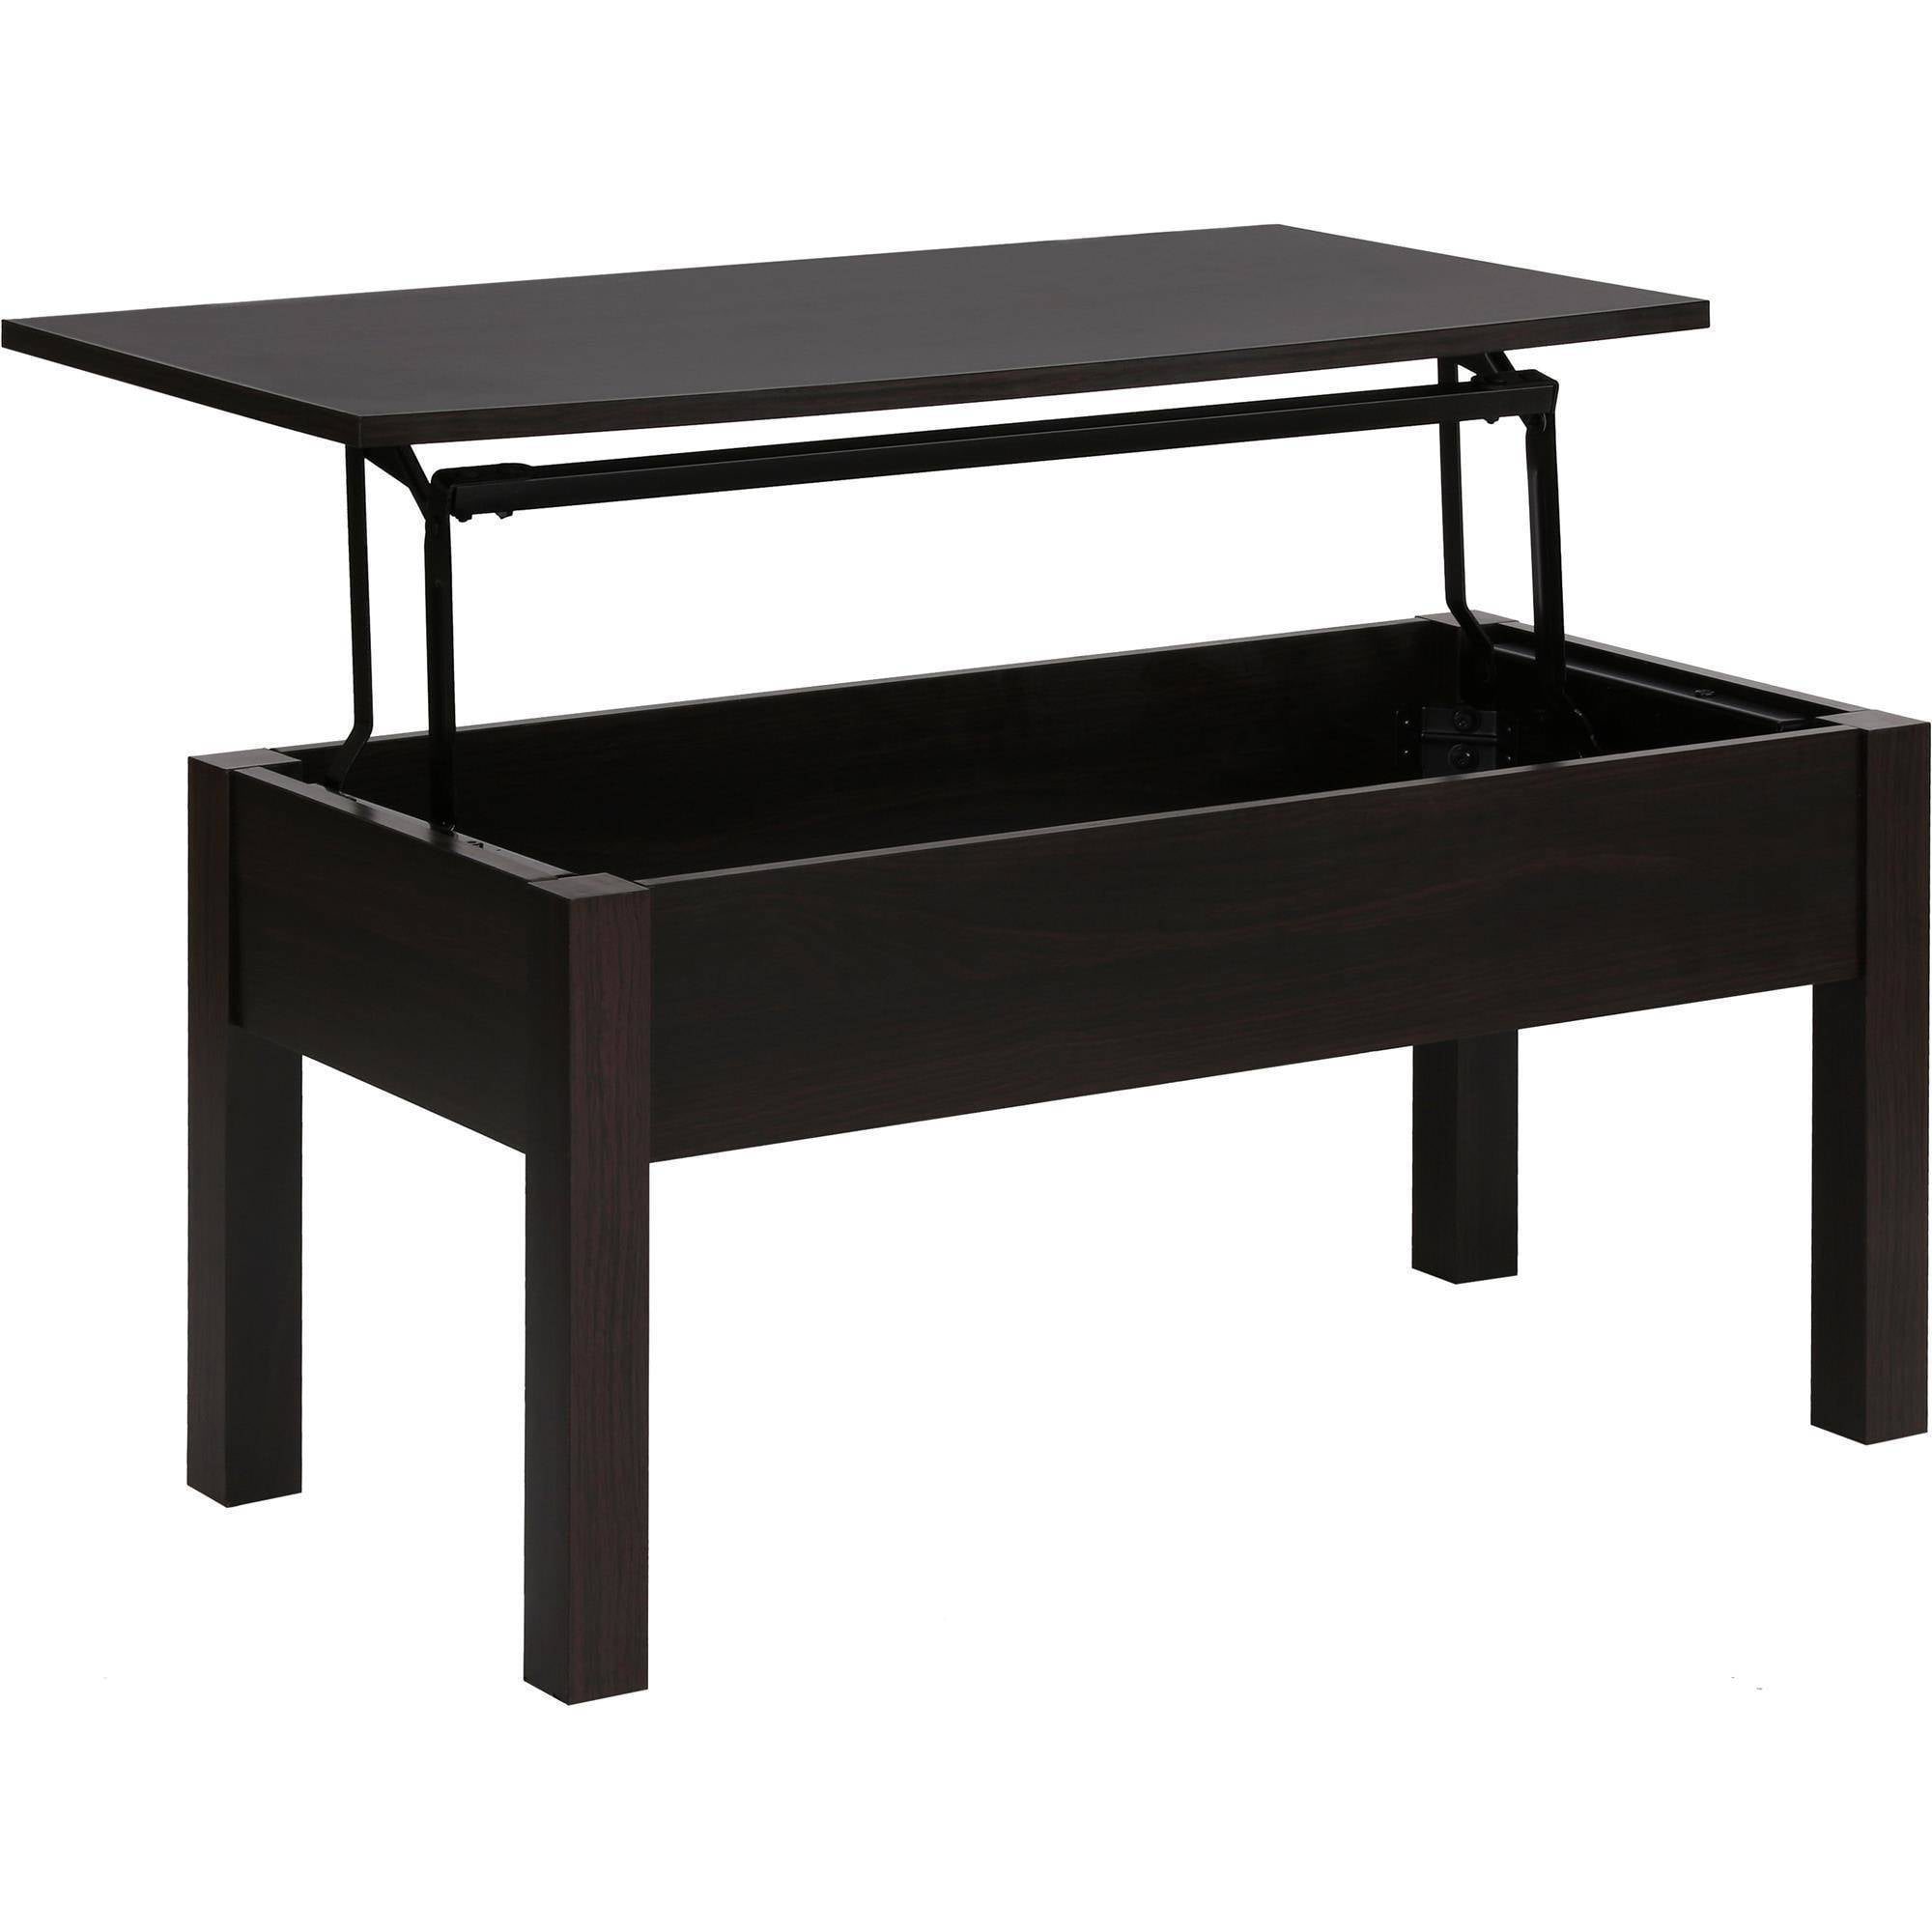 Coffee Table That Lifts Up - IHKD OLLIE MCDANIEL BLOG'S